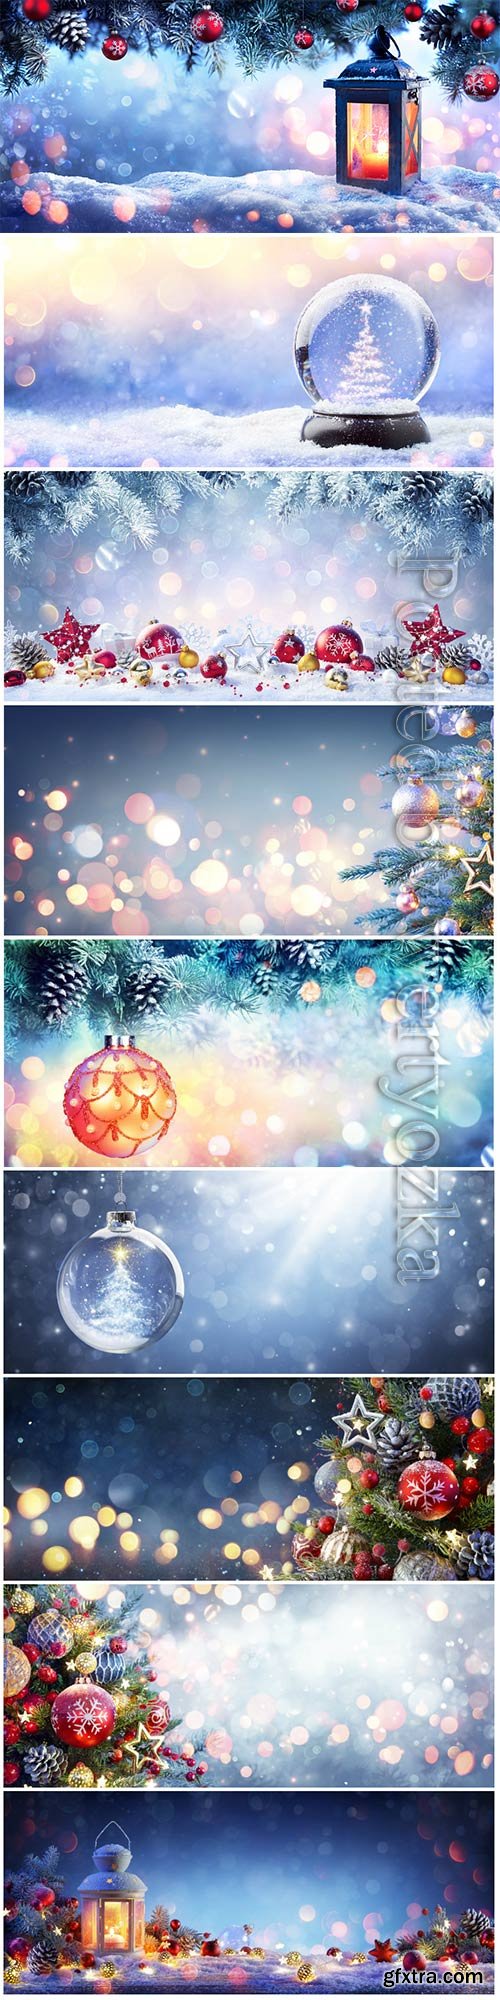 Wonderful New Year and Christmas Backgrounds